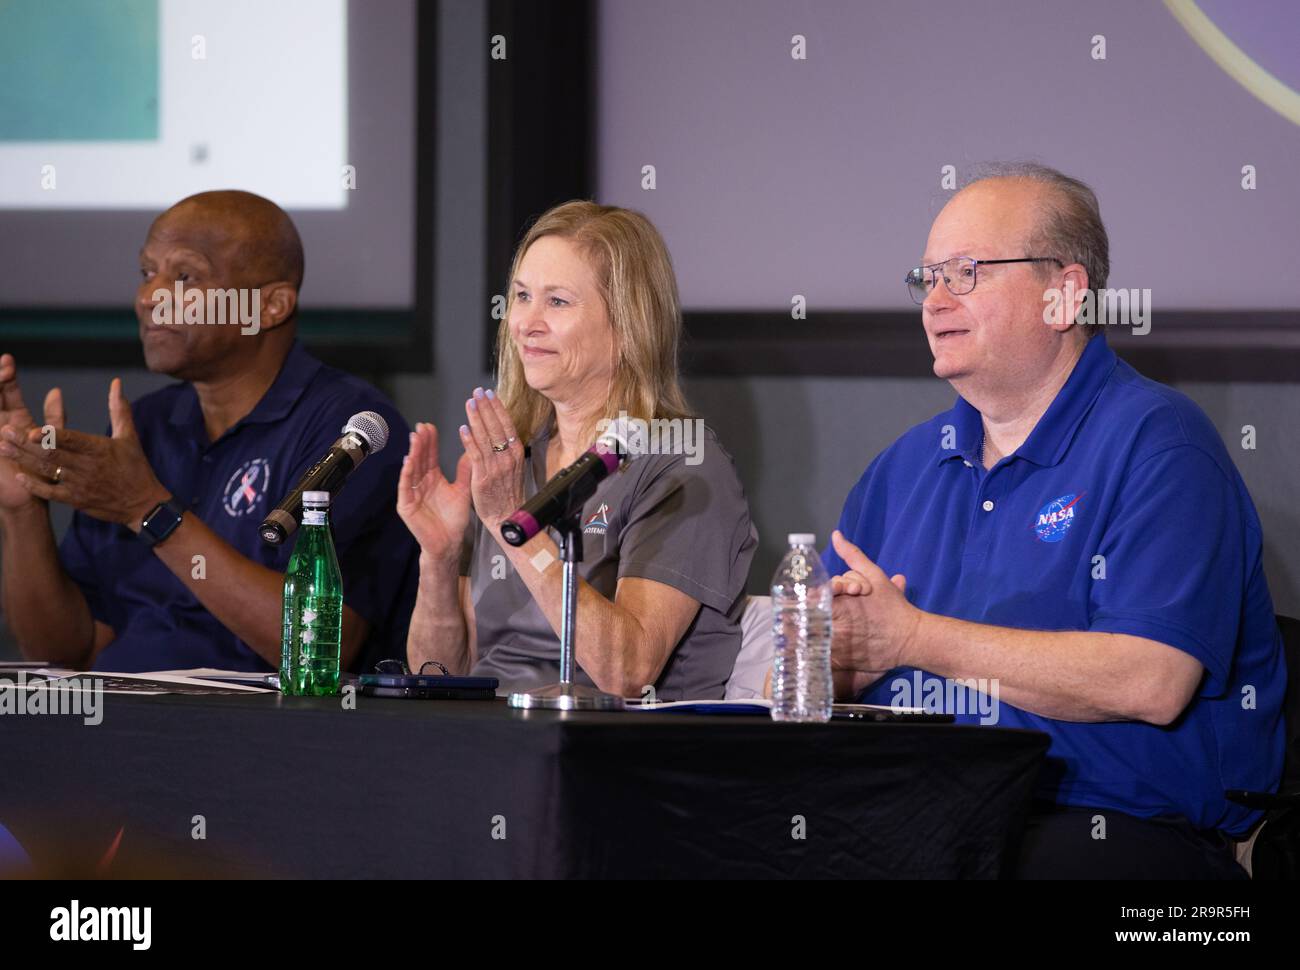 KSC Town Hall. From left, NASA’s Kennedy Space Center Deputy Director Kelvin Manning, Director Janet Petro, and Associate Director, Management Burt Summerfield participate in an employee Town Hall at the Florida spaceport on March 13, 2023. The senior leaders discussed key accomplishments and goals of the center, as well as answered questions from the Kennedy workforce. Stock Photo